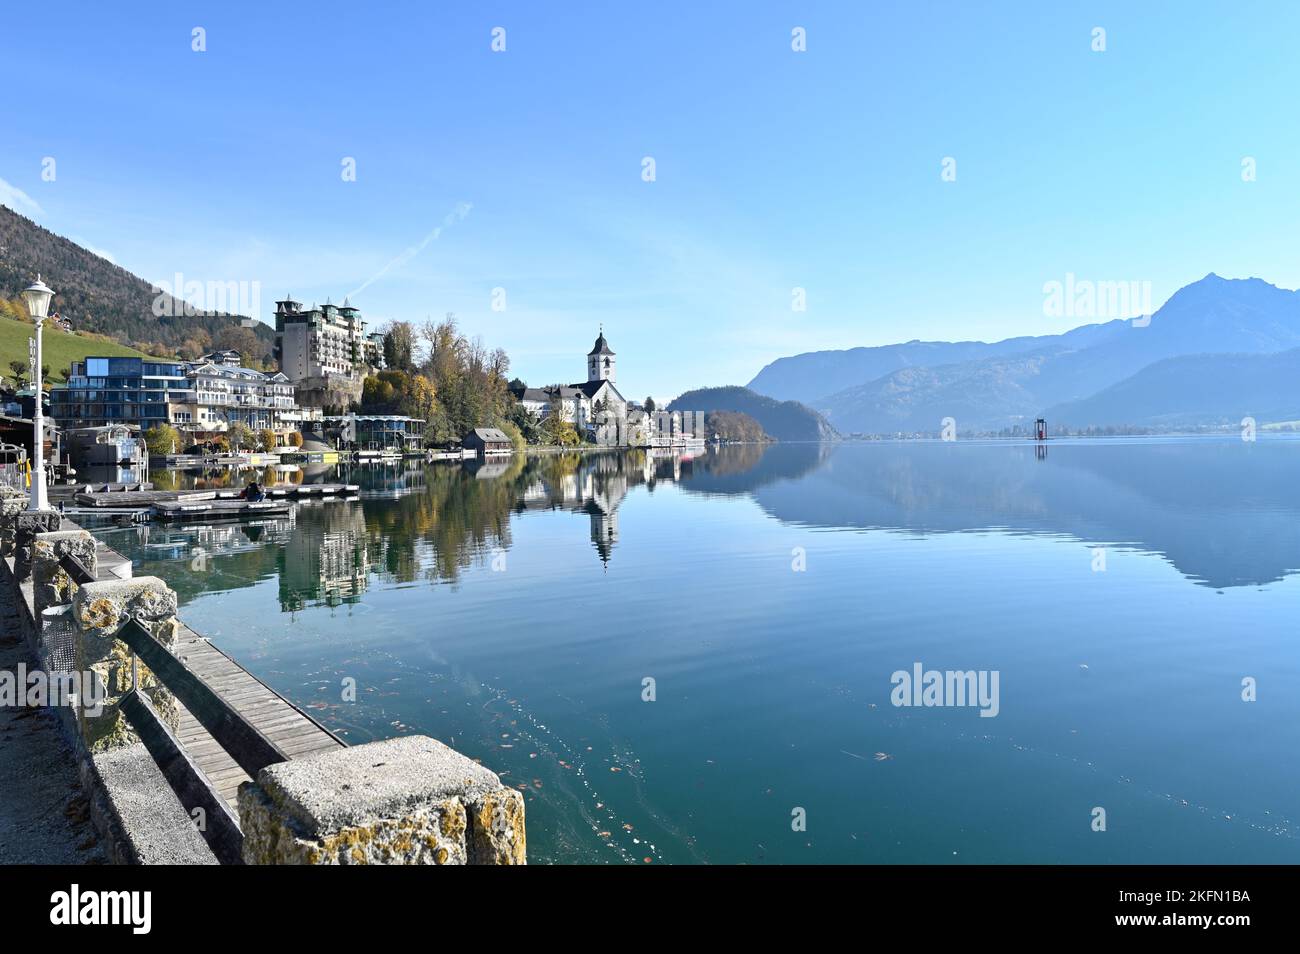 St. Wolfgang at the Wolfgangsee, Upper Austria, Austria. View of St. Wolfgang and Lake Wolfgang Stock Photo